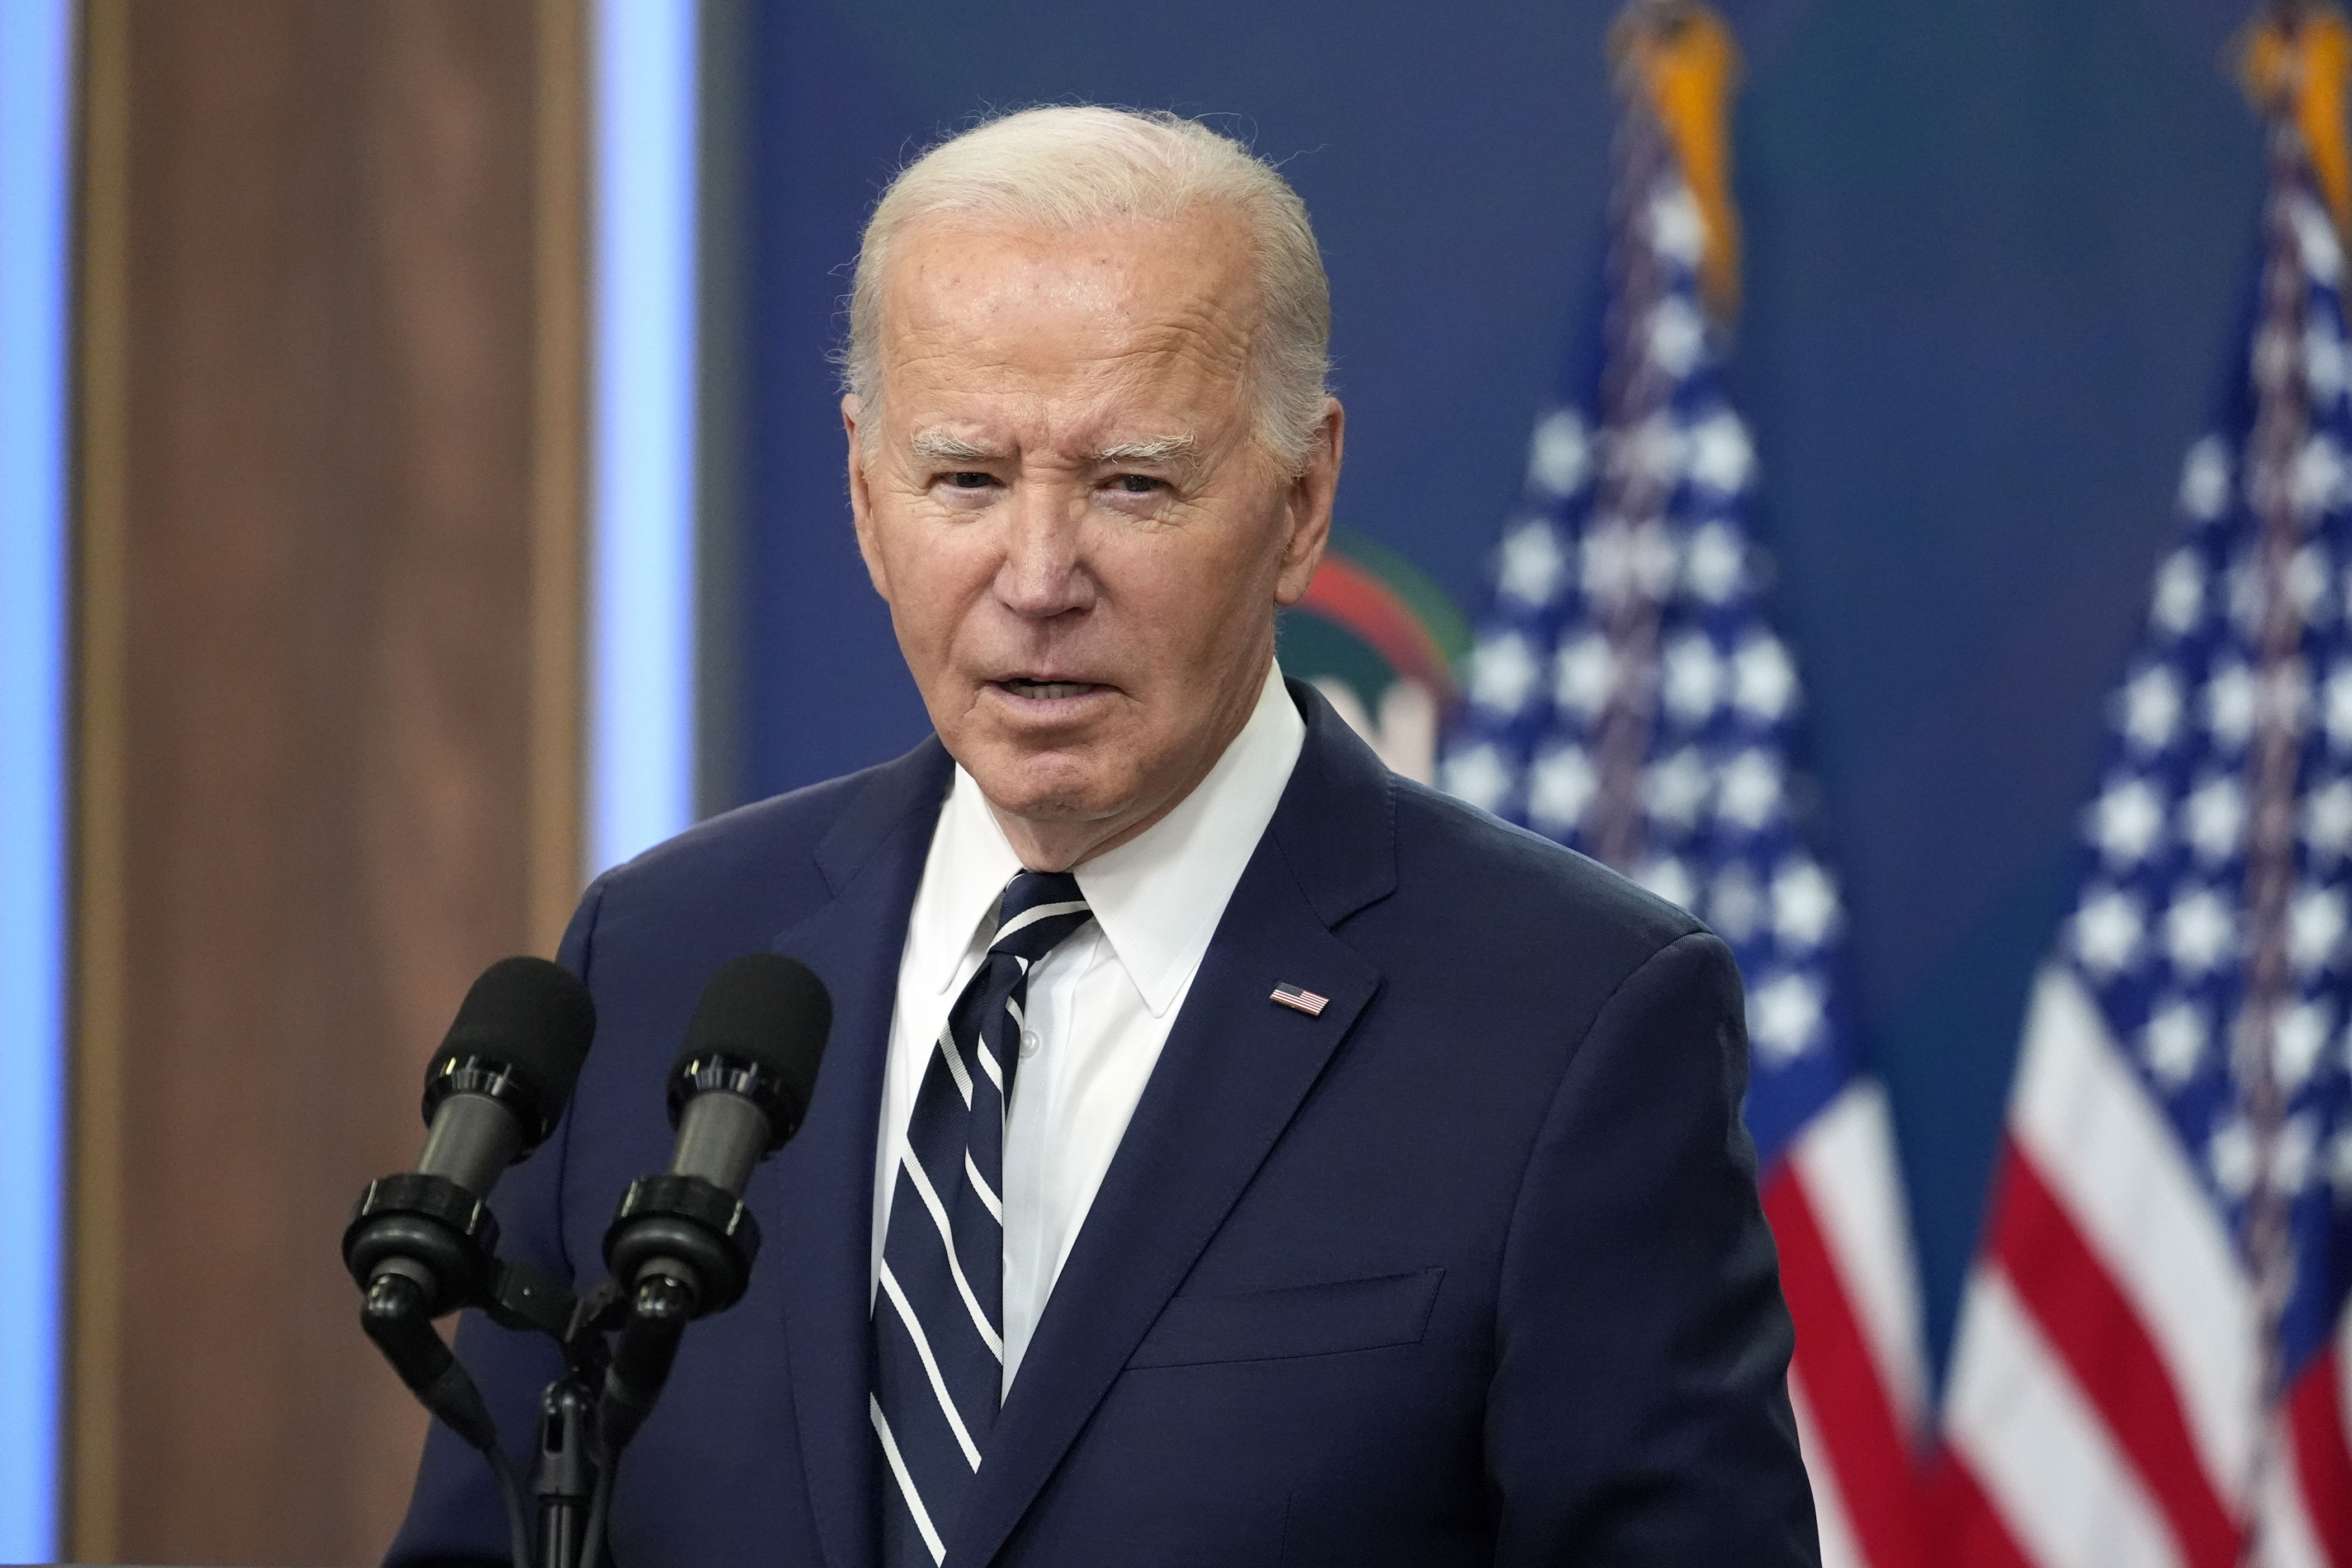 biden tells racial justice meeting, 'we've kept our promises,' as he looks to energize black voters